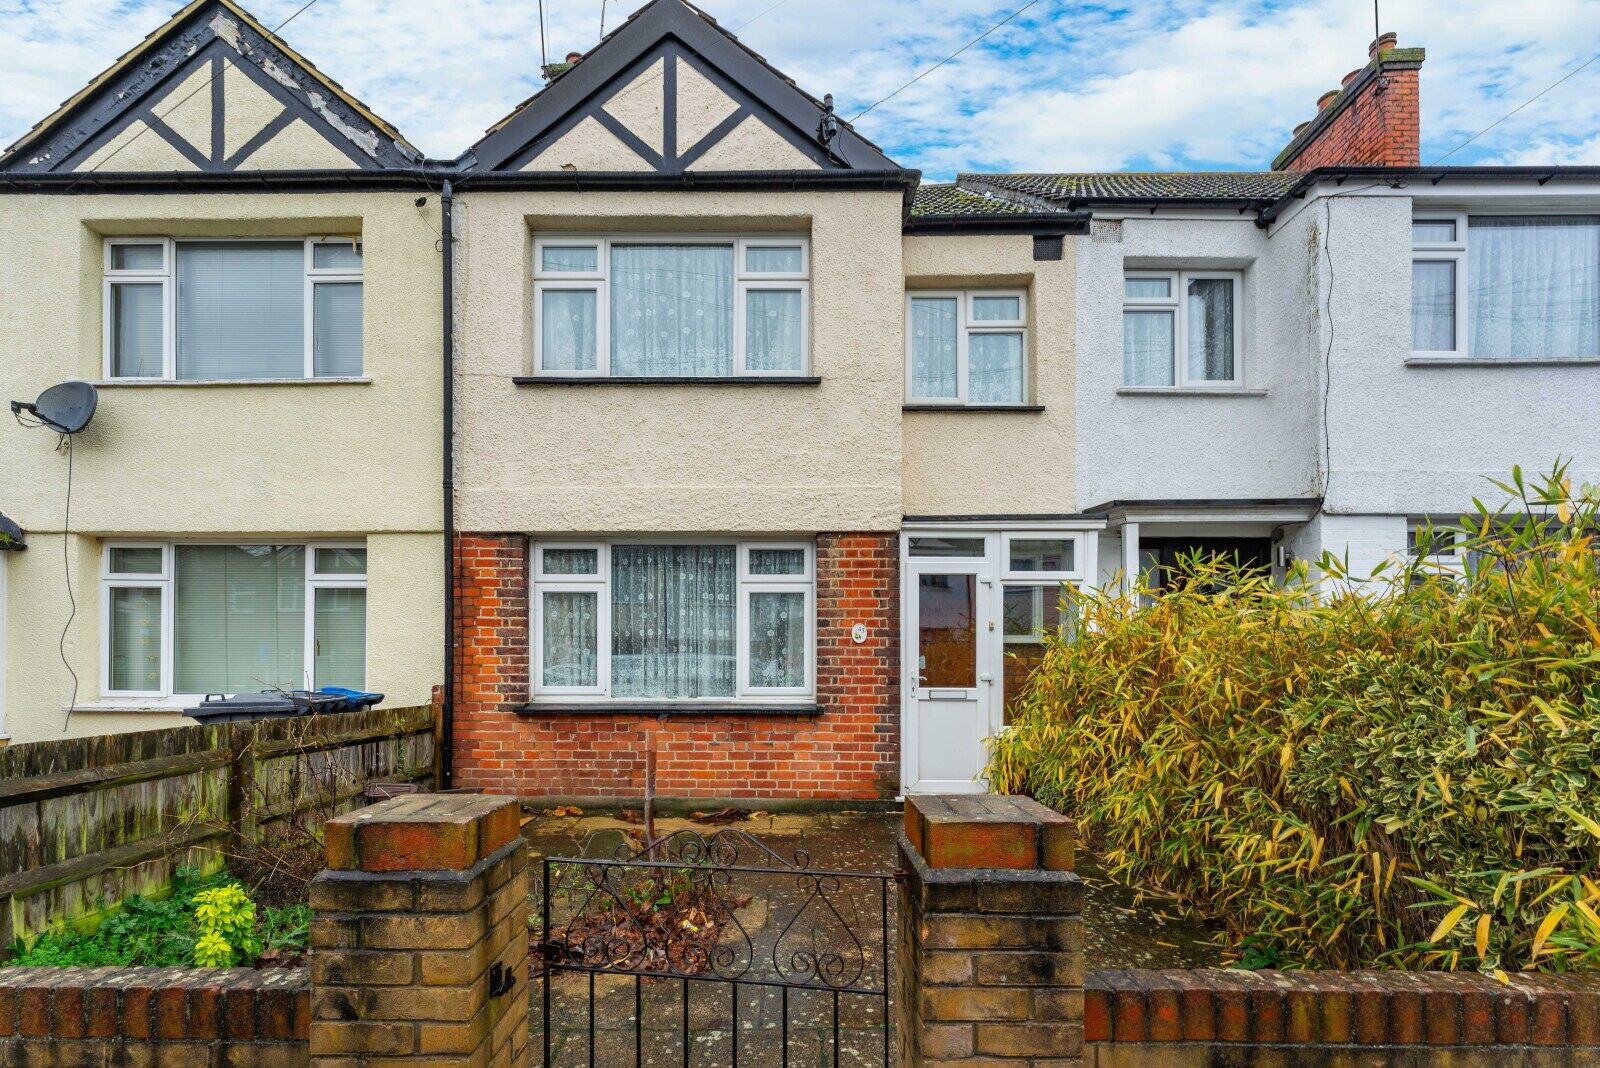 3 bedroom mid terraced house for sale Castleton Road, Mitcham, CR4, main image